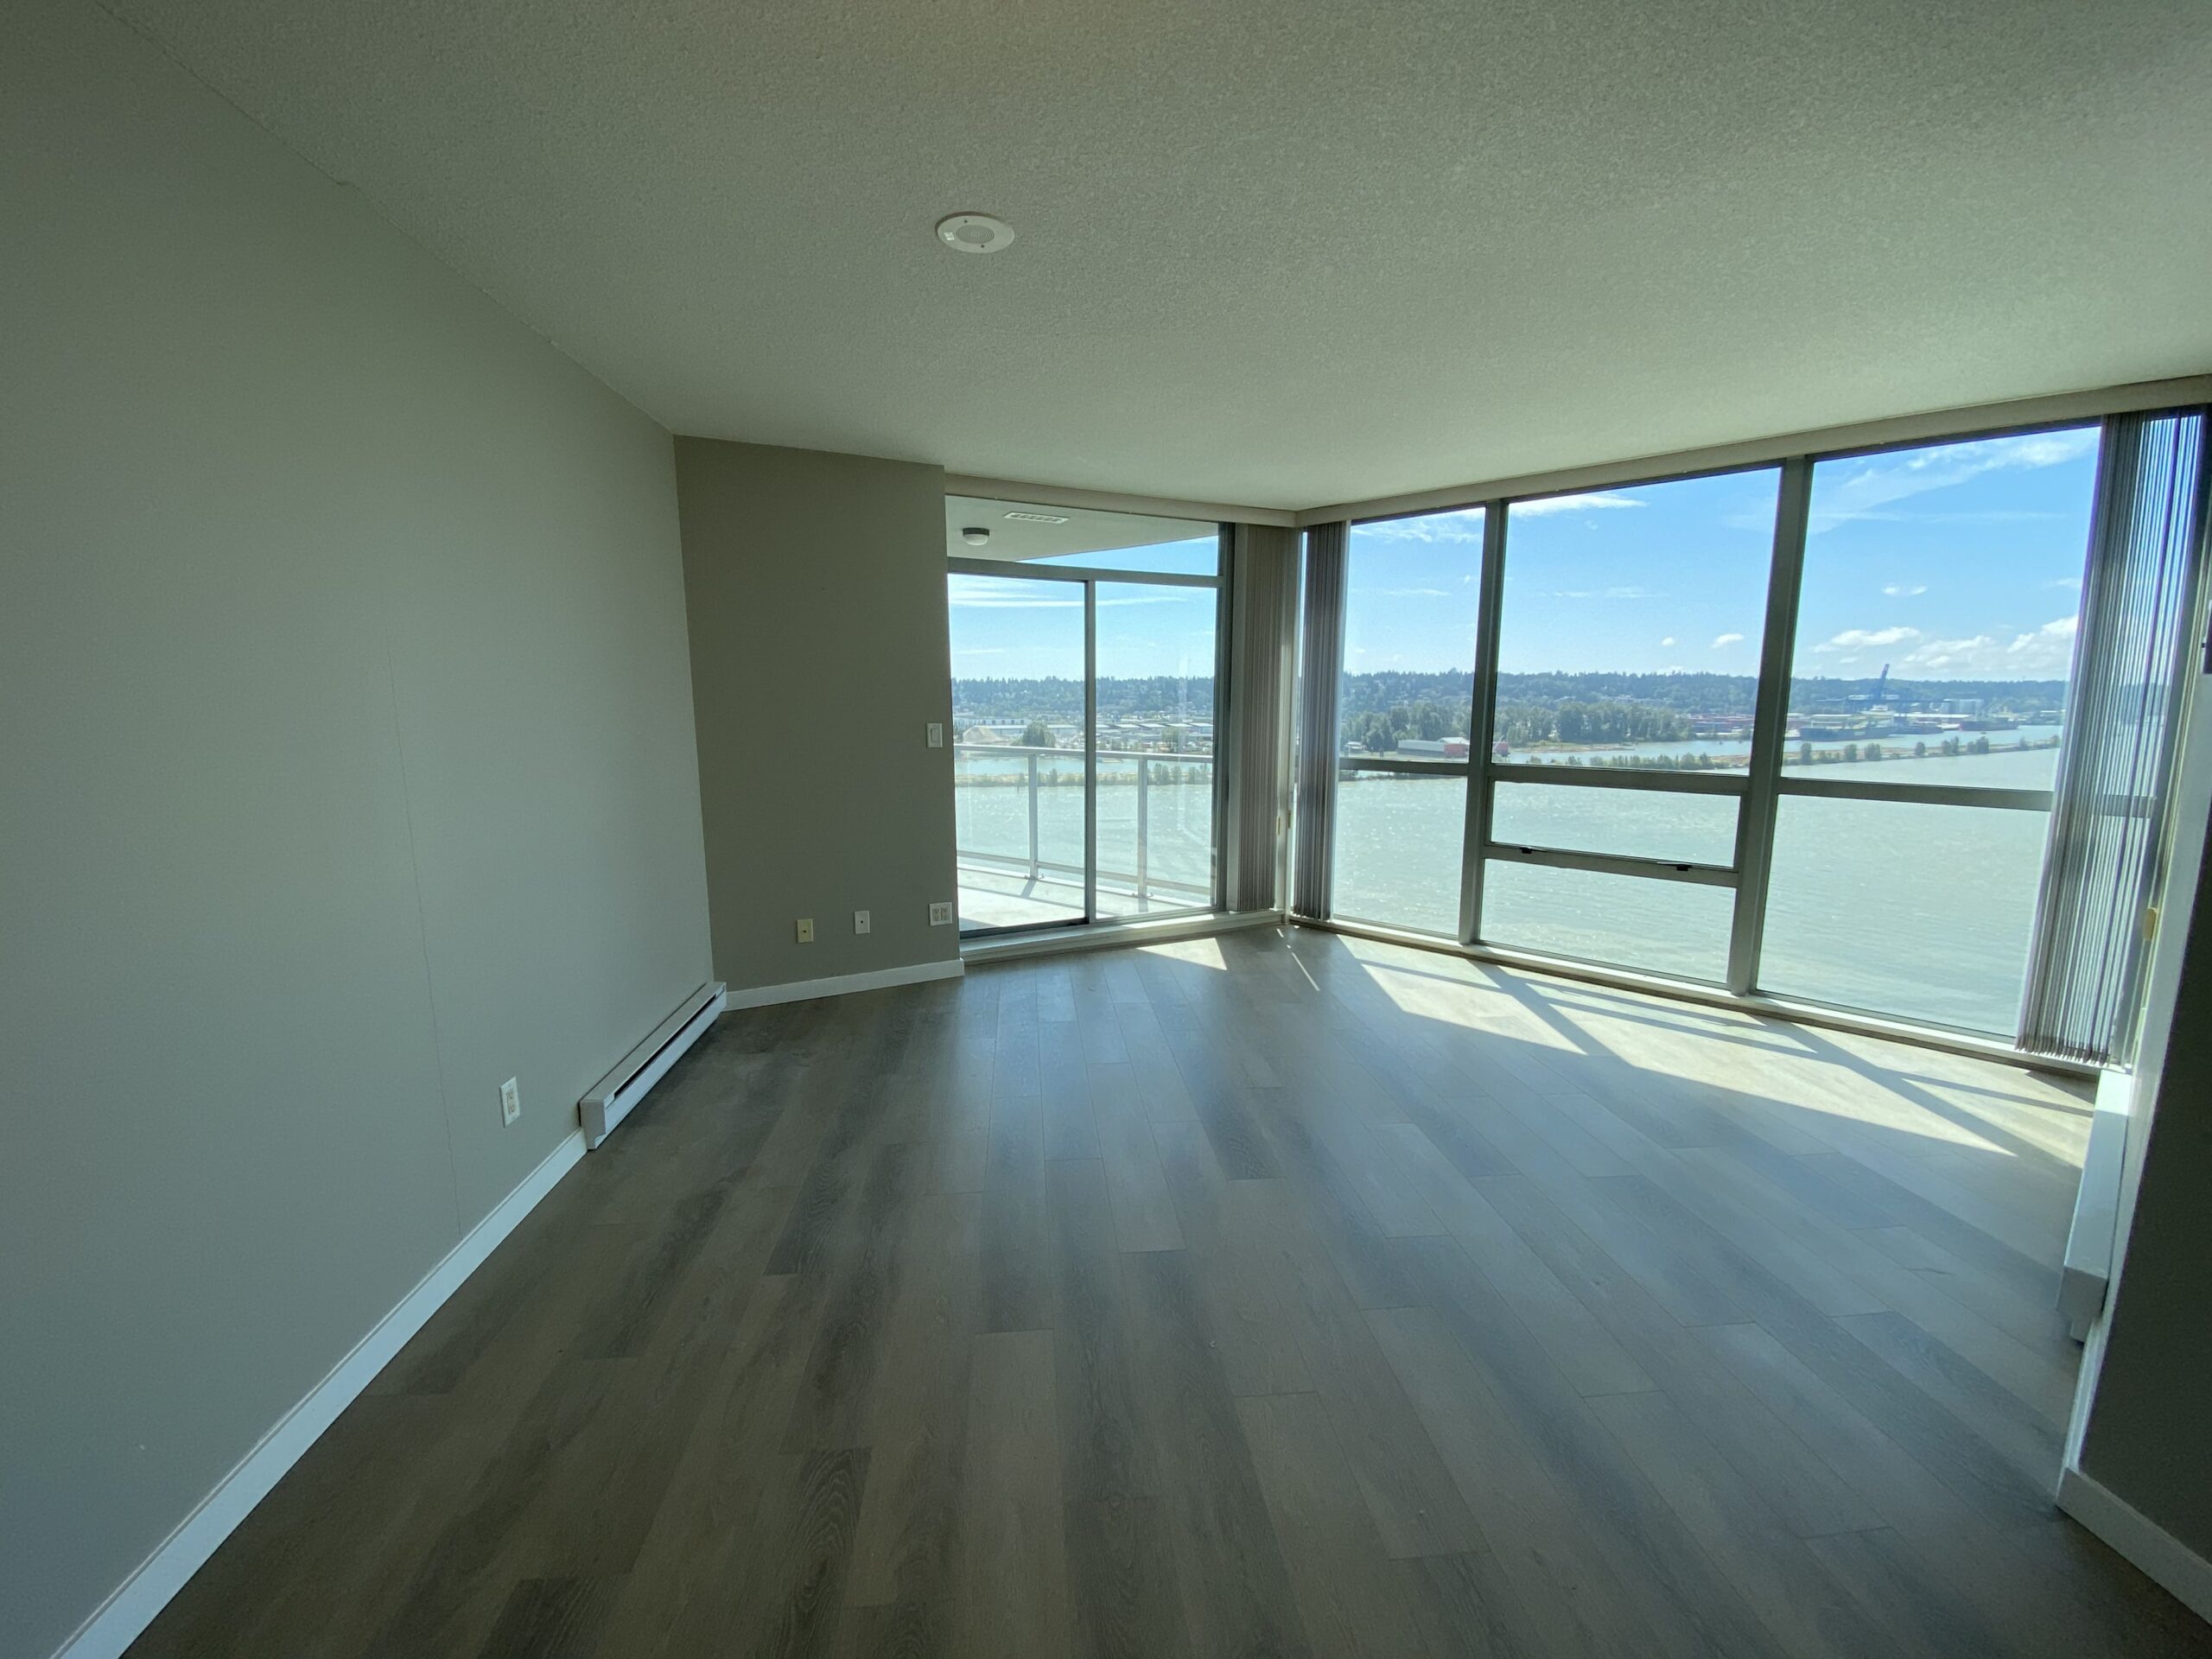 Sub-Penthouse With Waterfront Views + New Flooring!